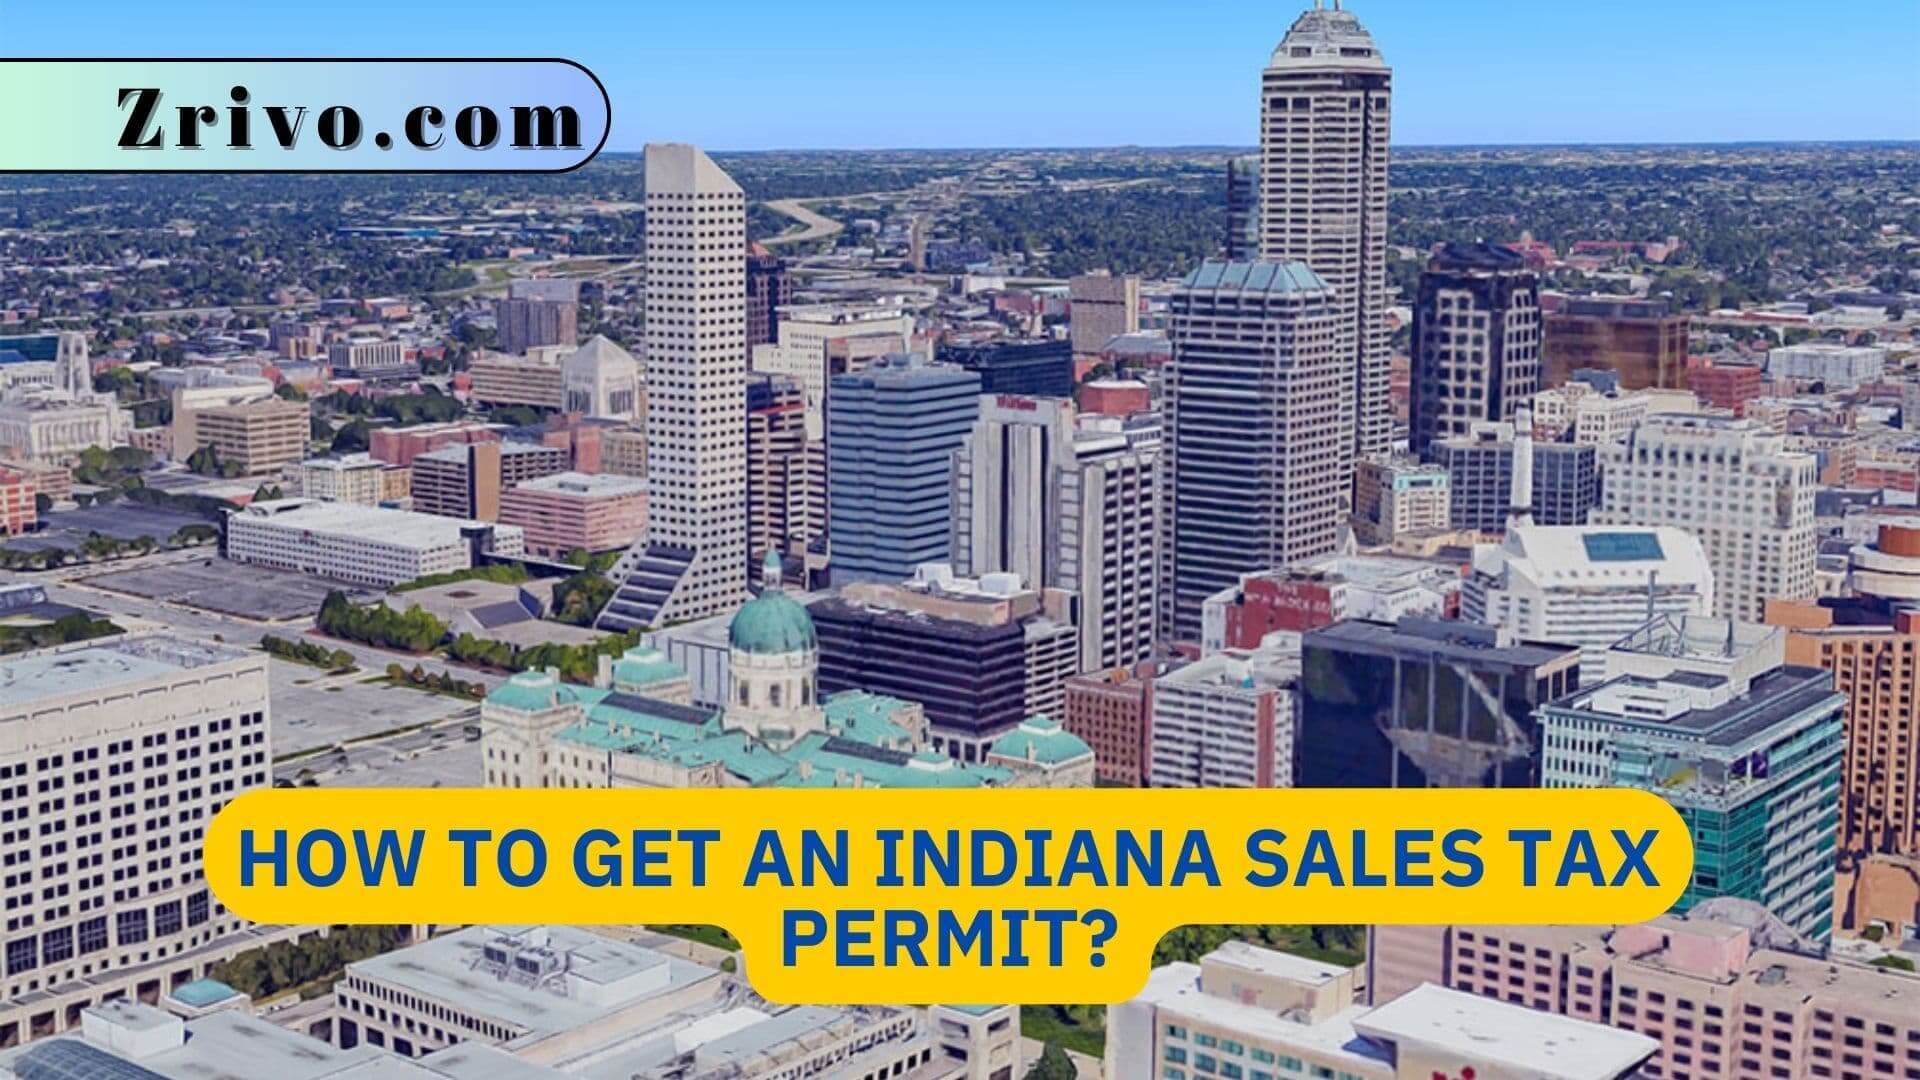 How to Get an Indiana Sales Tax Permit